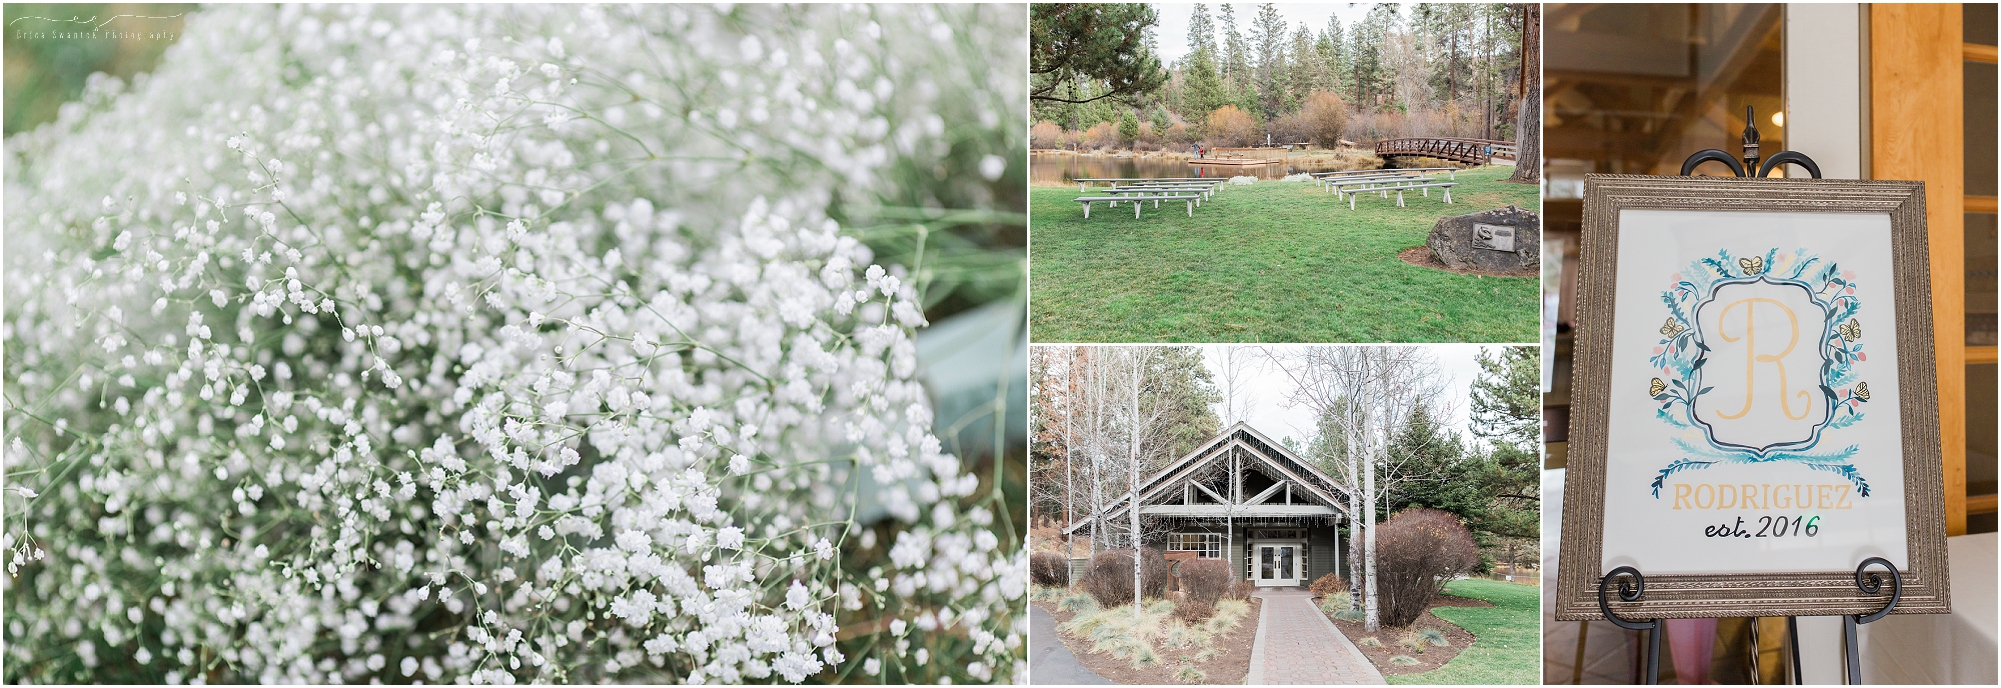 A beautiful early winter wedding, outdoors on the grass if front of the pond, with benches and a baby's breath alter. 